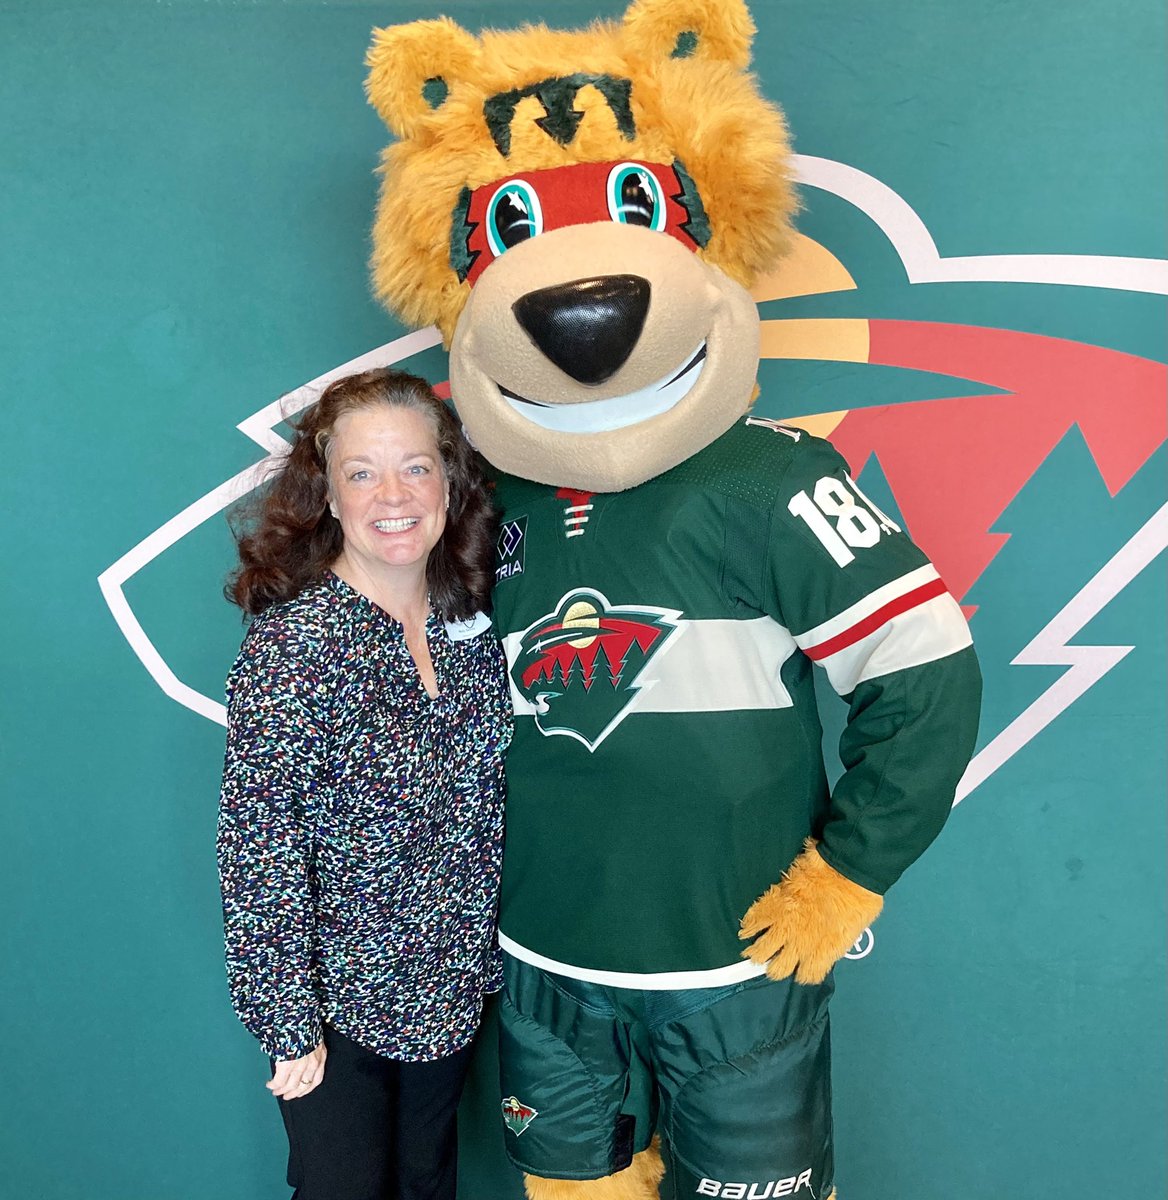 Great food and fun folks at #TasteoftheWild today at the X. Thanks @kellyfmcgrath, @wildbitesmn and @NordyWild! #GoWild